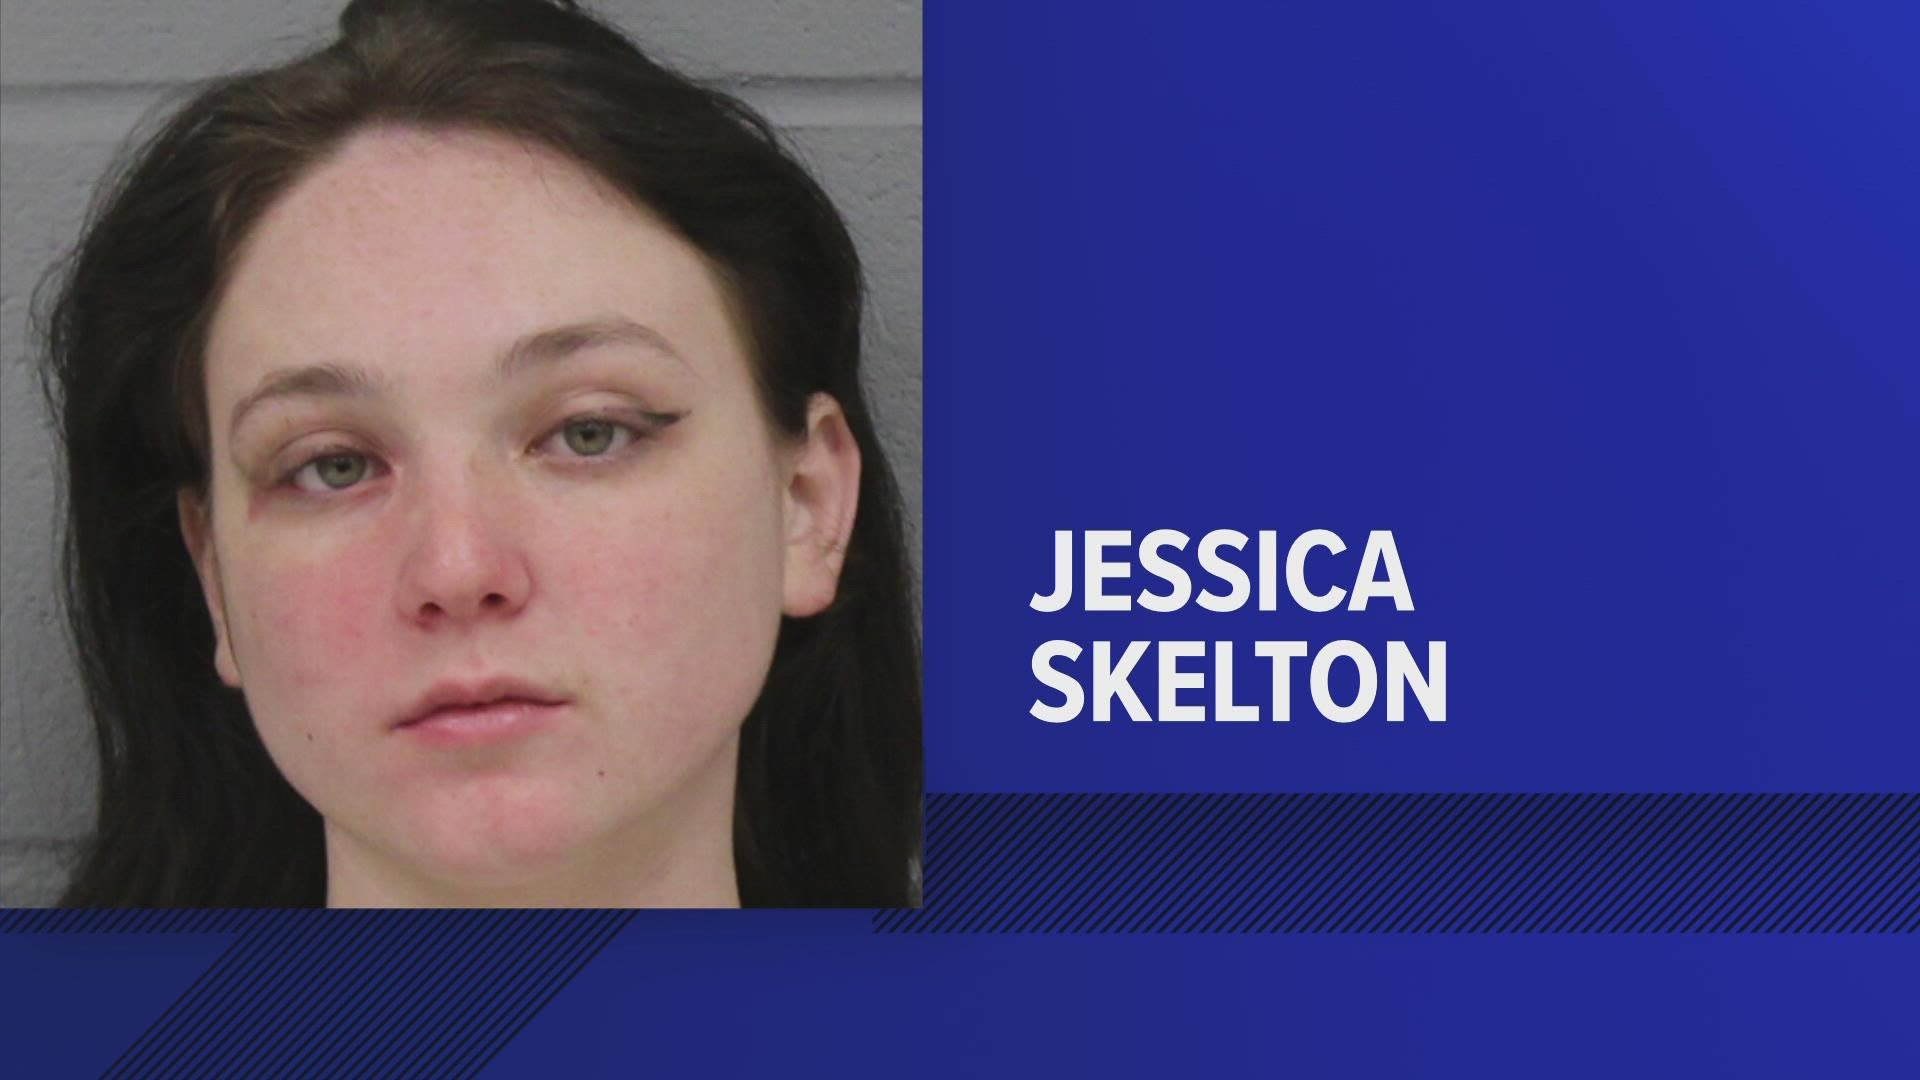 APD said Jessica Skelton took her one-year-old daughter, which drew concern for the child's safety. Skelton is now in custody on unrelated charges.